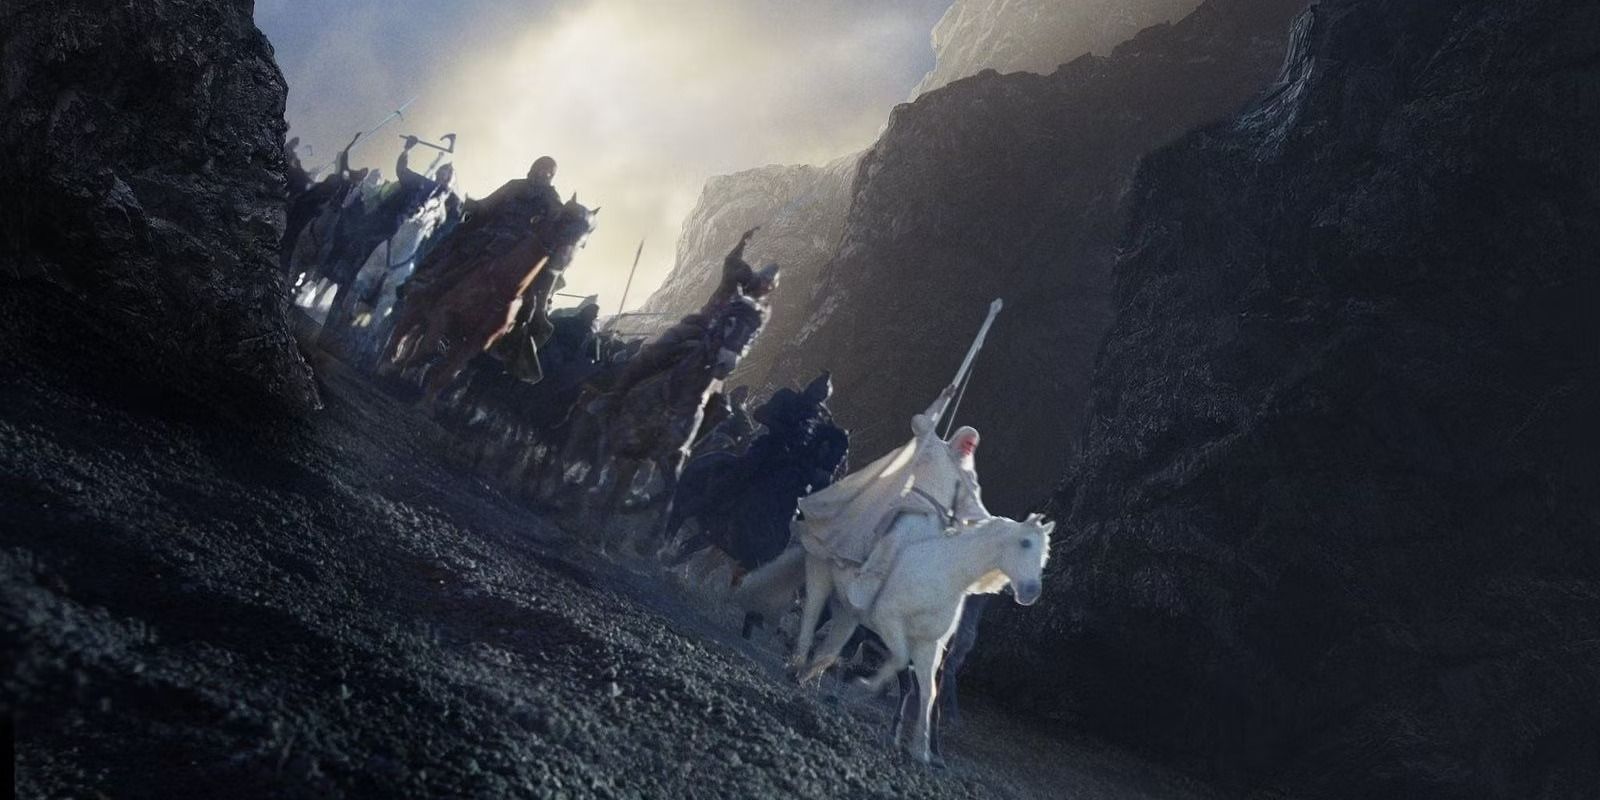 Gandalf rides Shadowfax alongside Rohirrim in Rohan in The Lord of the Rings.